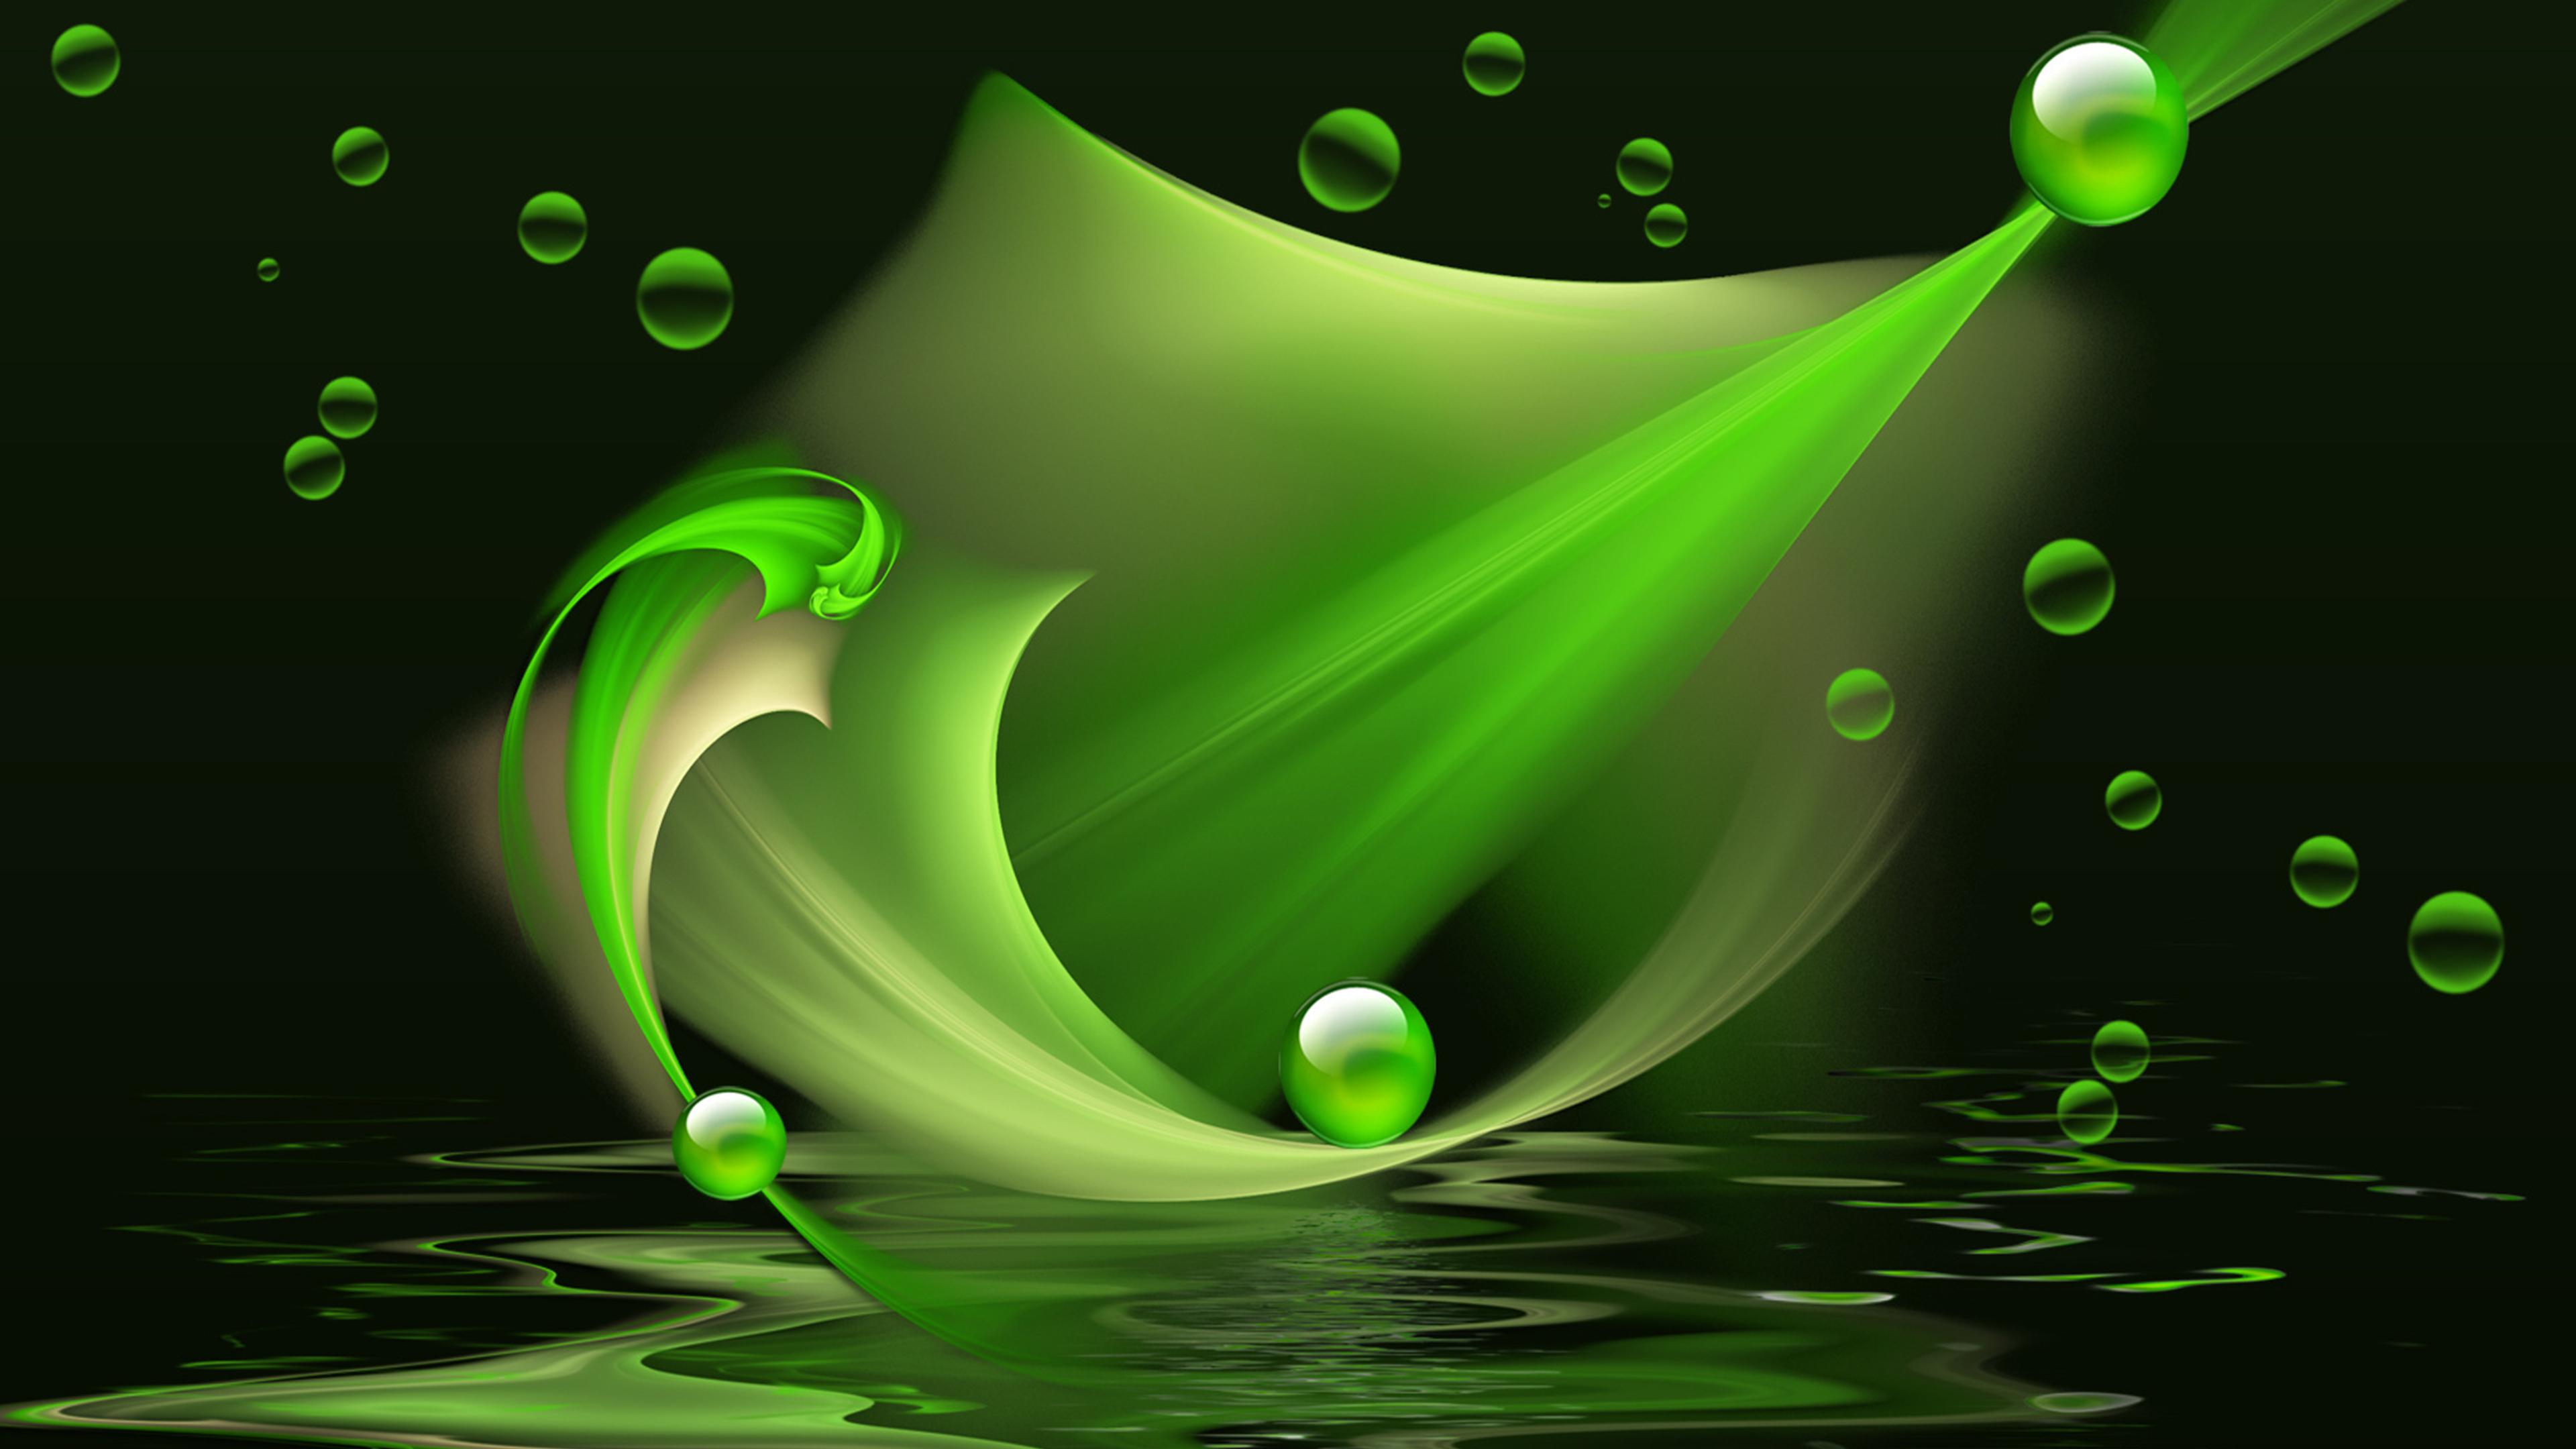 39,605 Green Background Hd Images, Stock Photos, 3D objects, & Vectors |  Shutterstock